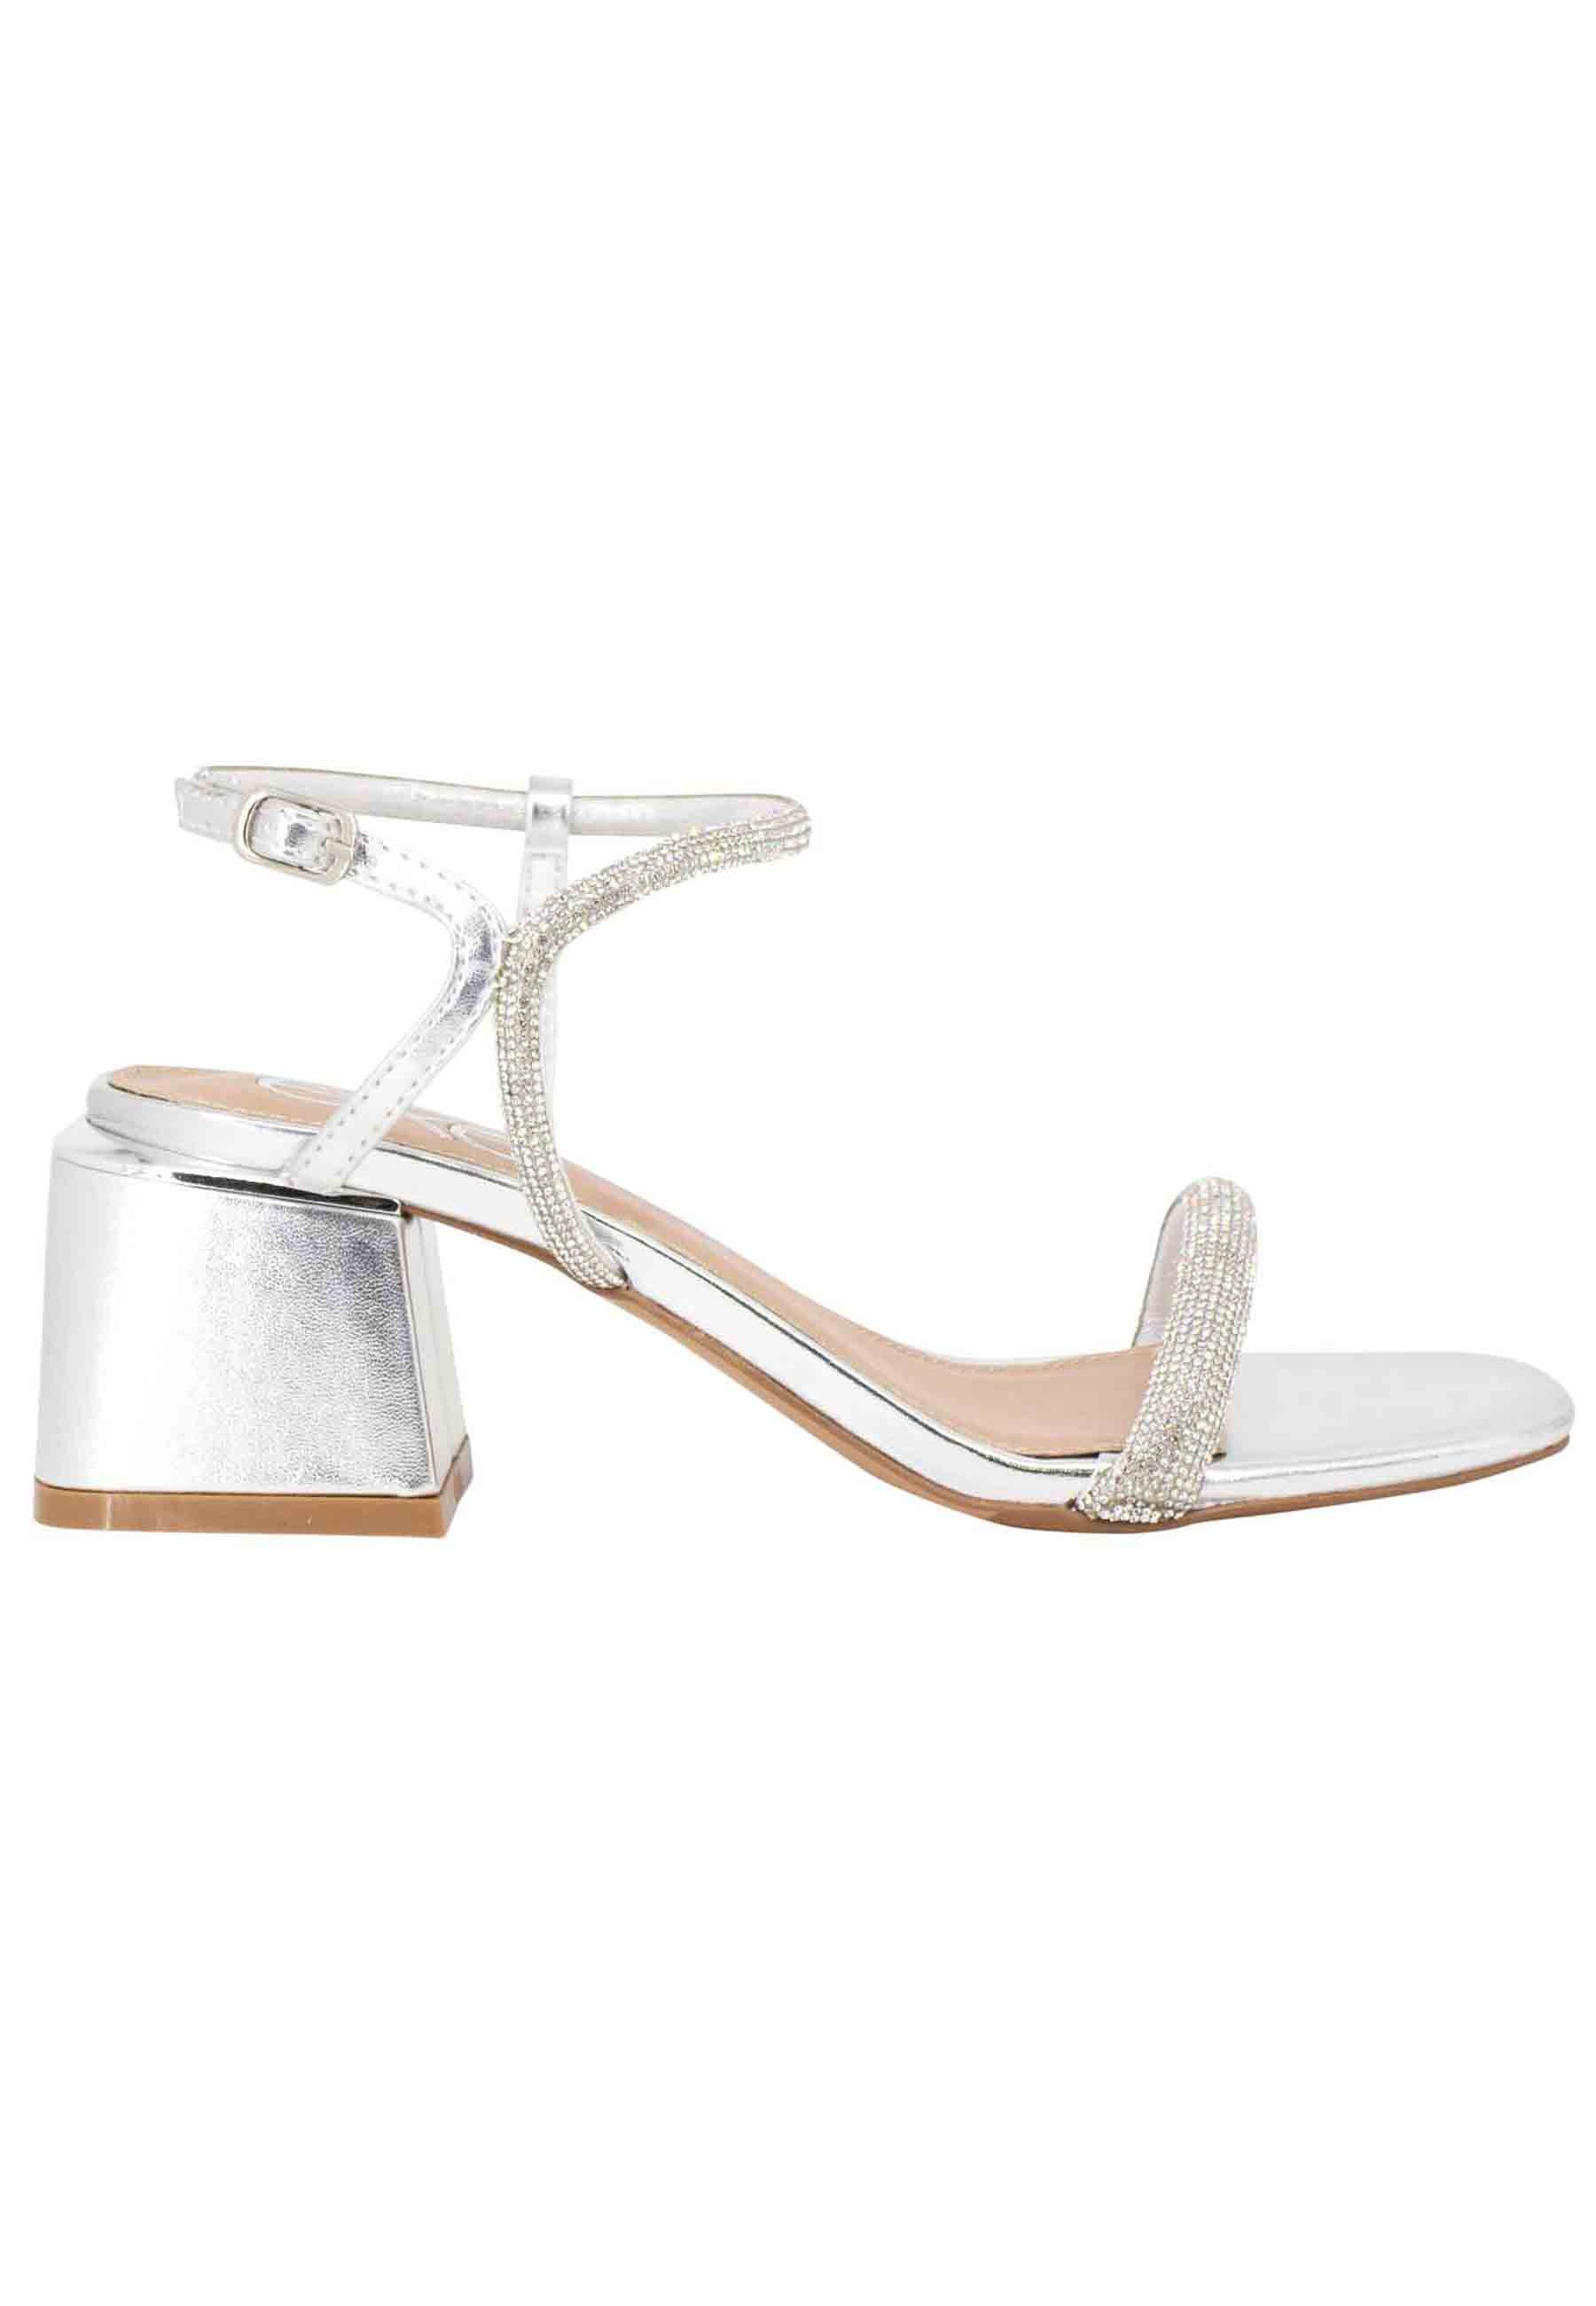 Women's sandals in glitter fabric and silver rhinestones with ankle strap